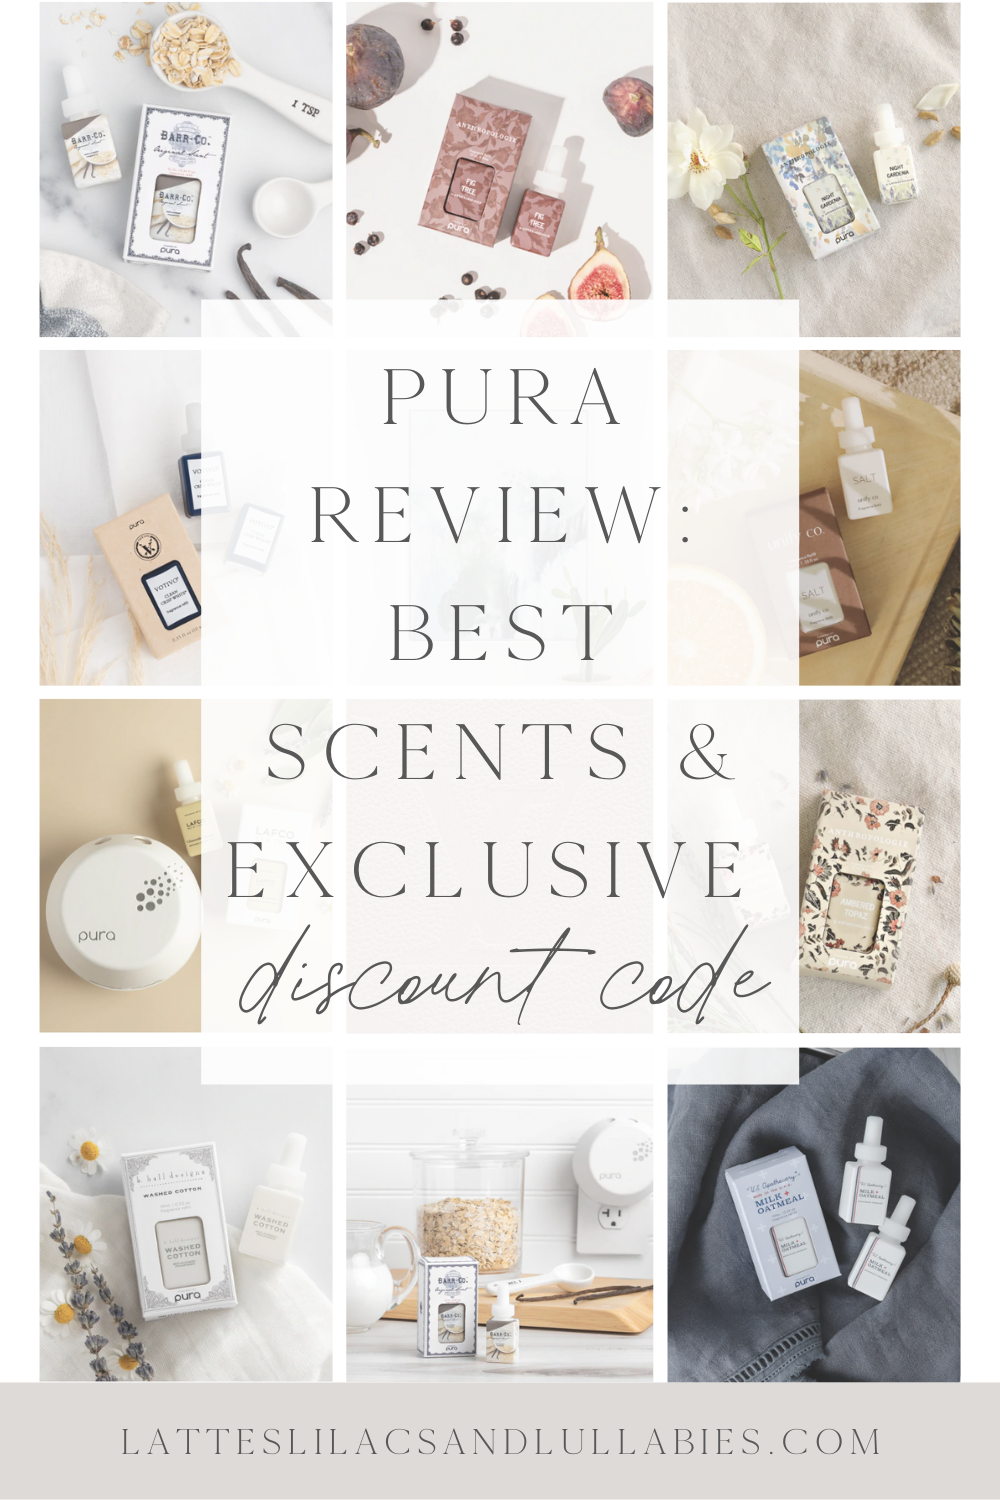 Pura Review: The Smart Home Diffuser & Exclusive Discount Code